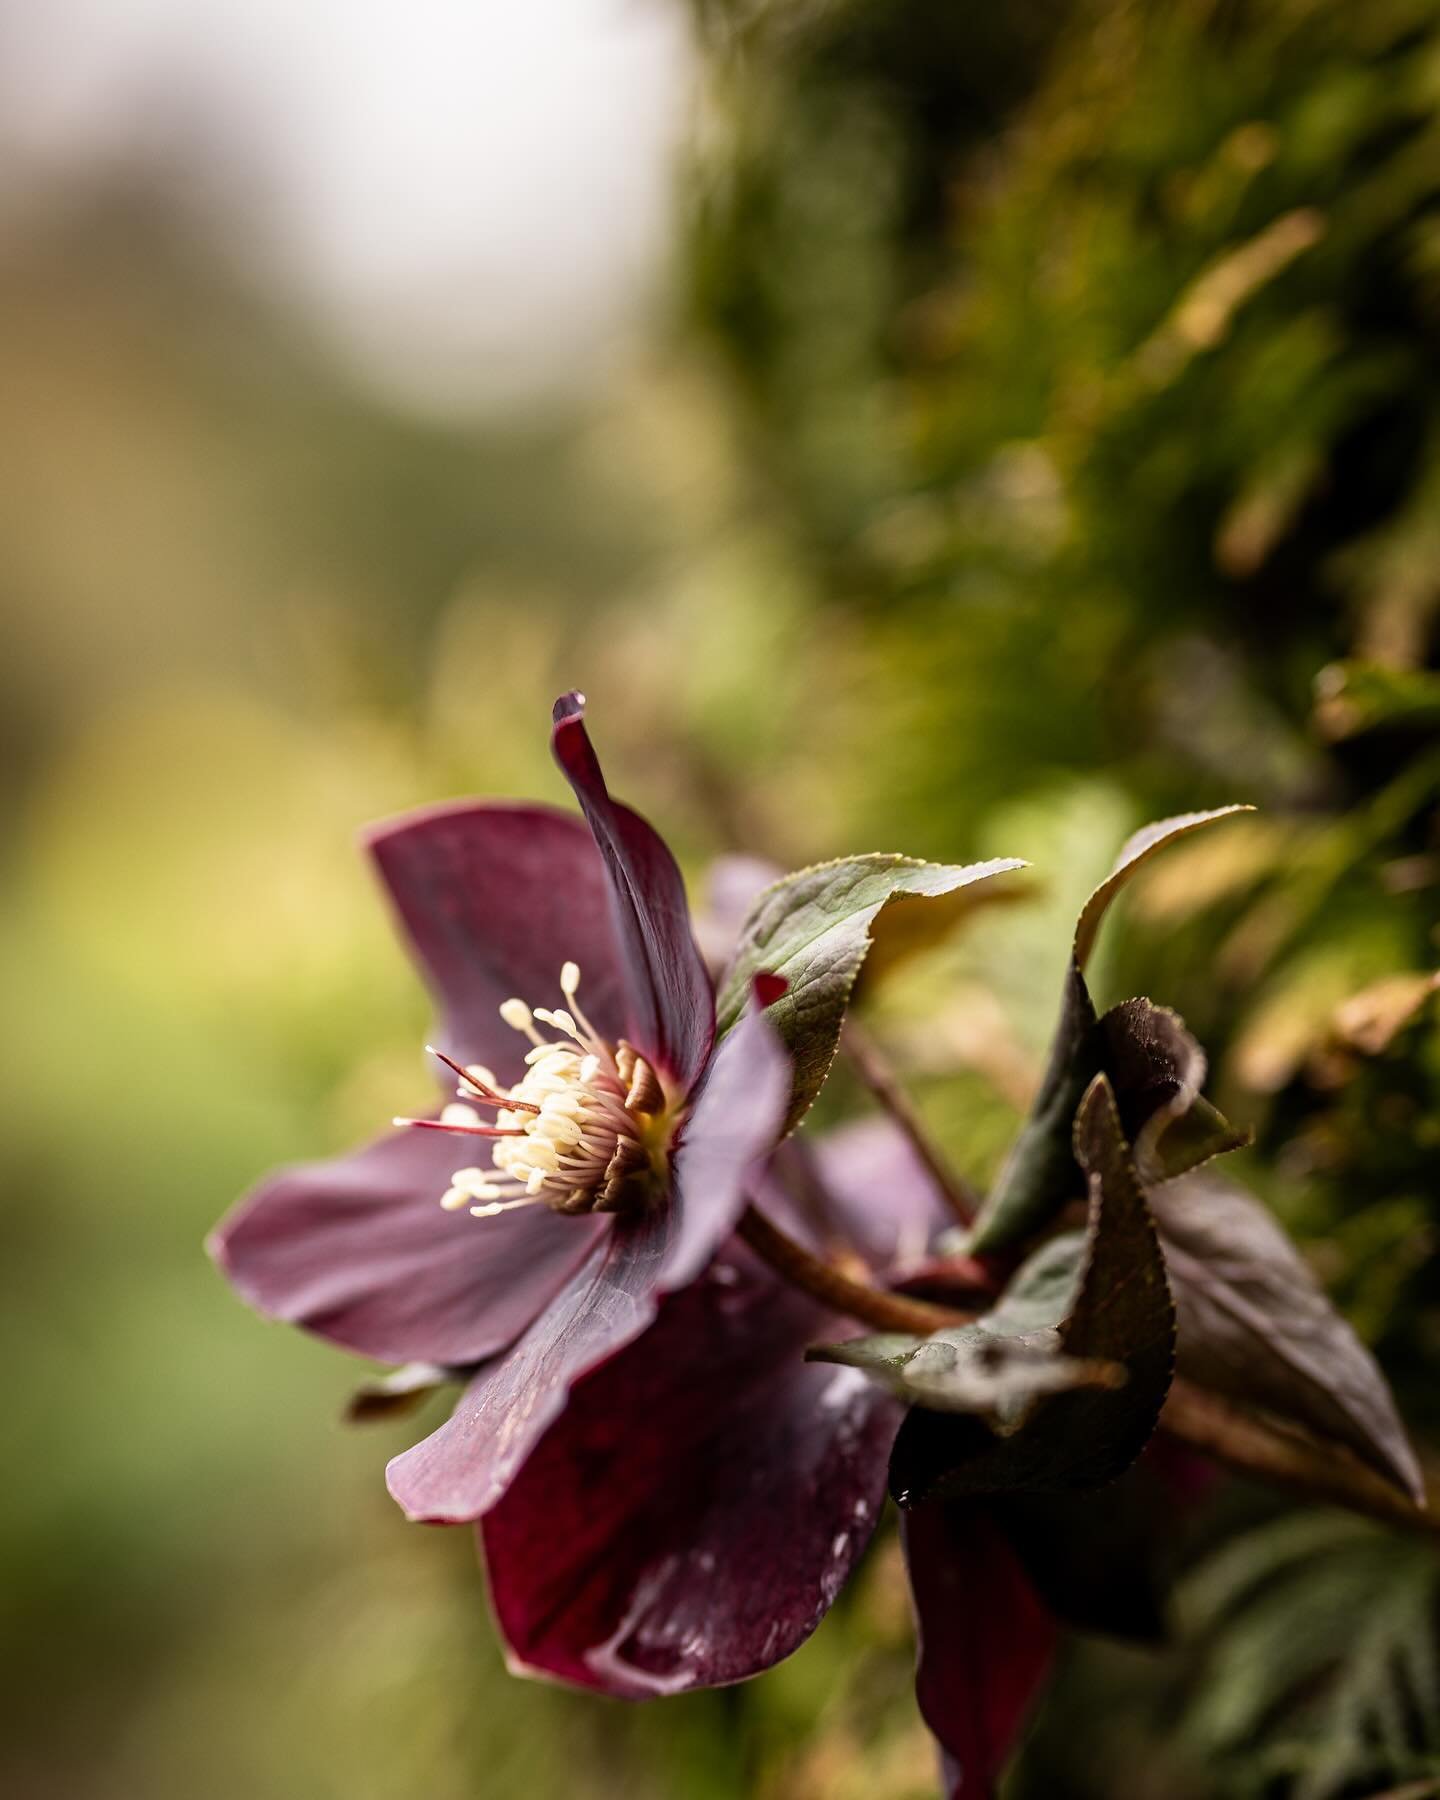 A couple of photos from my garden today on a day that is full of both highs and lows, a story of my last 18 months!

I loved how the hellebore has been forced to face the world because of how it had grown through the conifer shrub. Instead of its usu